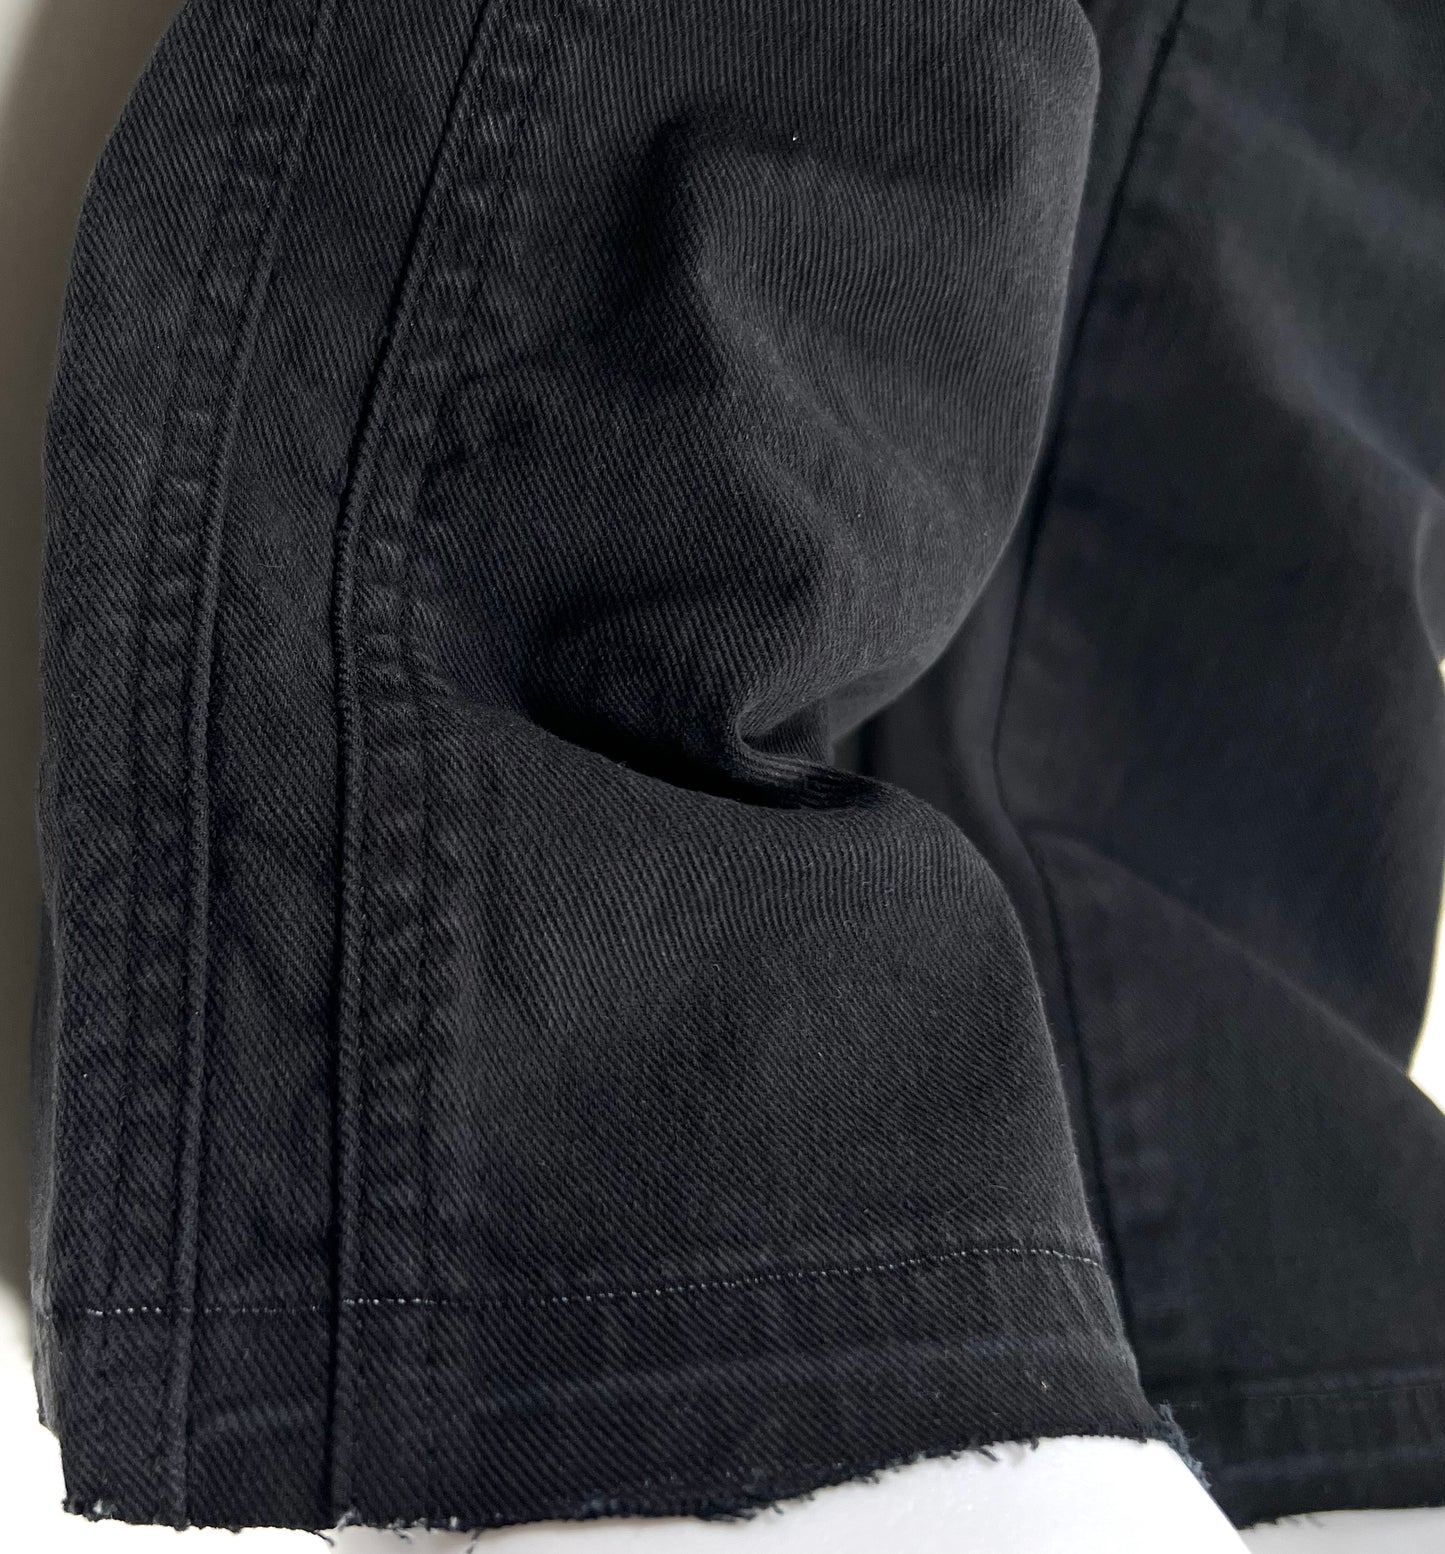 A close up of a pair of REPRESENT M07064 STRAIGHT LEG DENIM BLACK jeans.